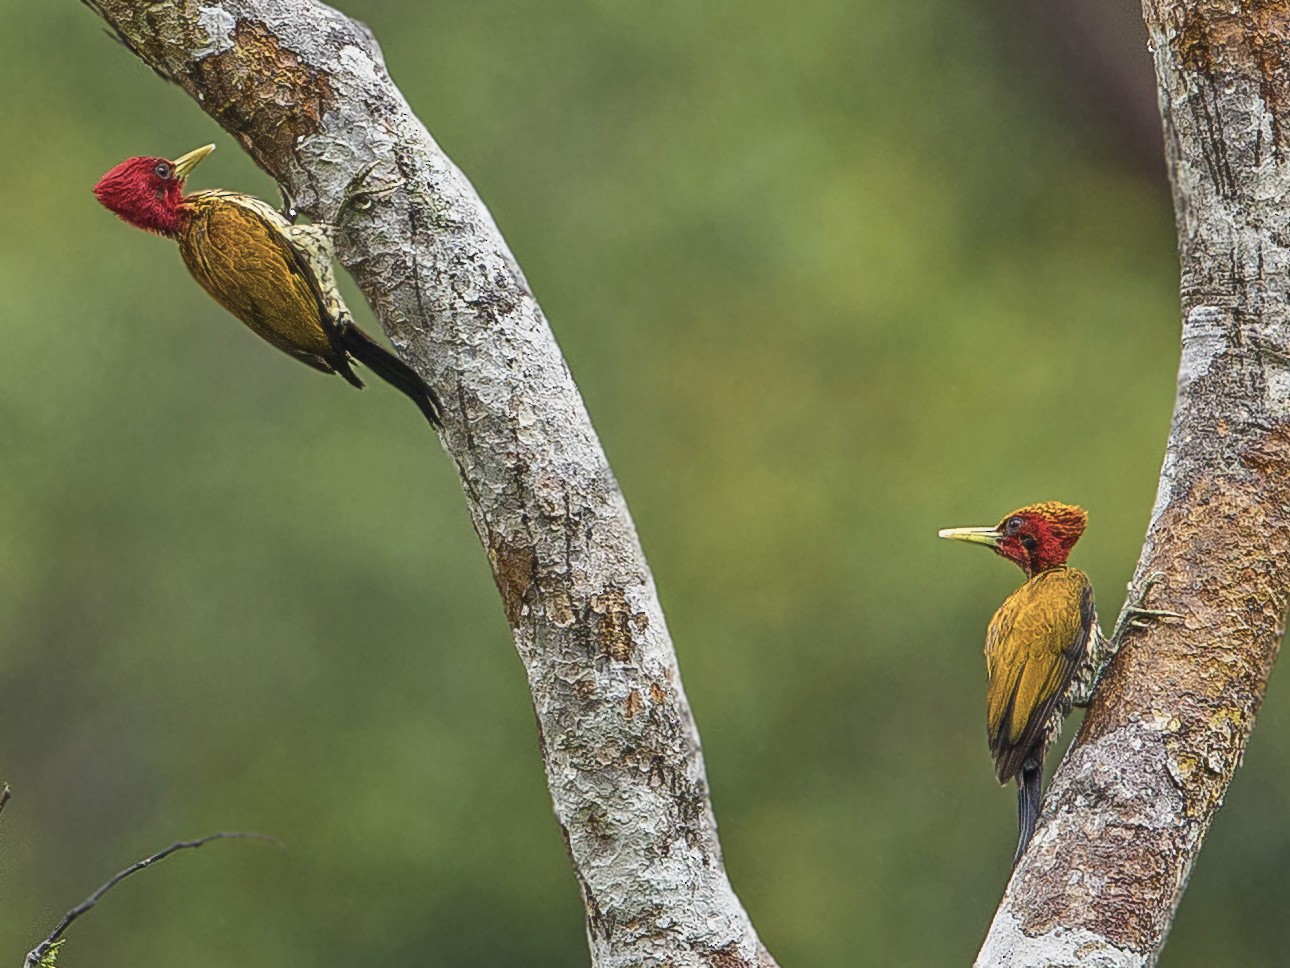 brown bird with red head: Identification, Behavior, and Conservation Red-Headed Flameback